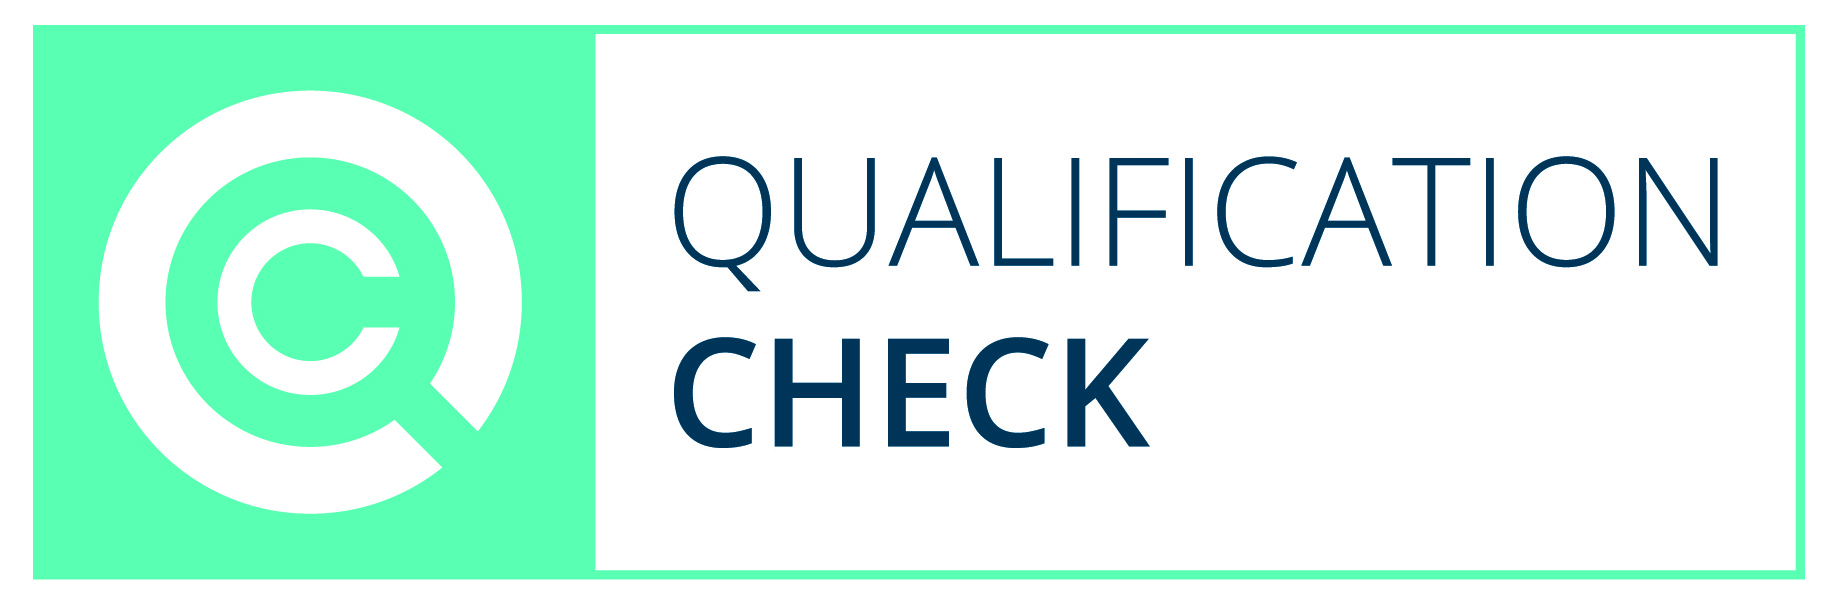 Qualification Check’s